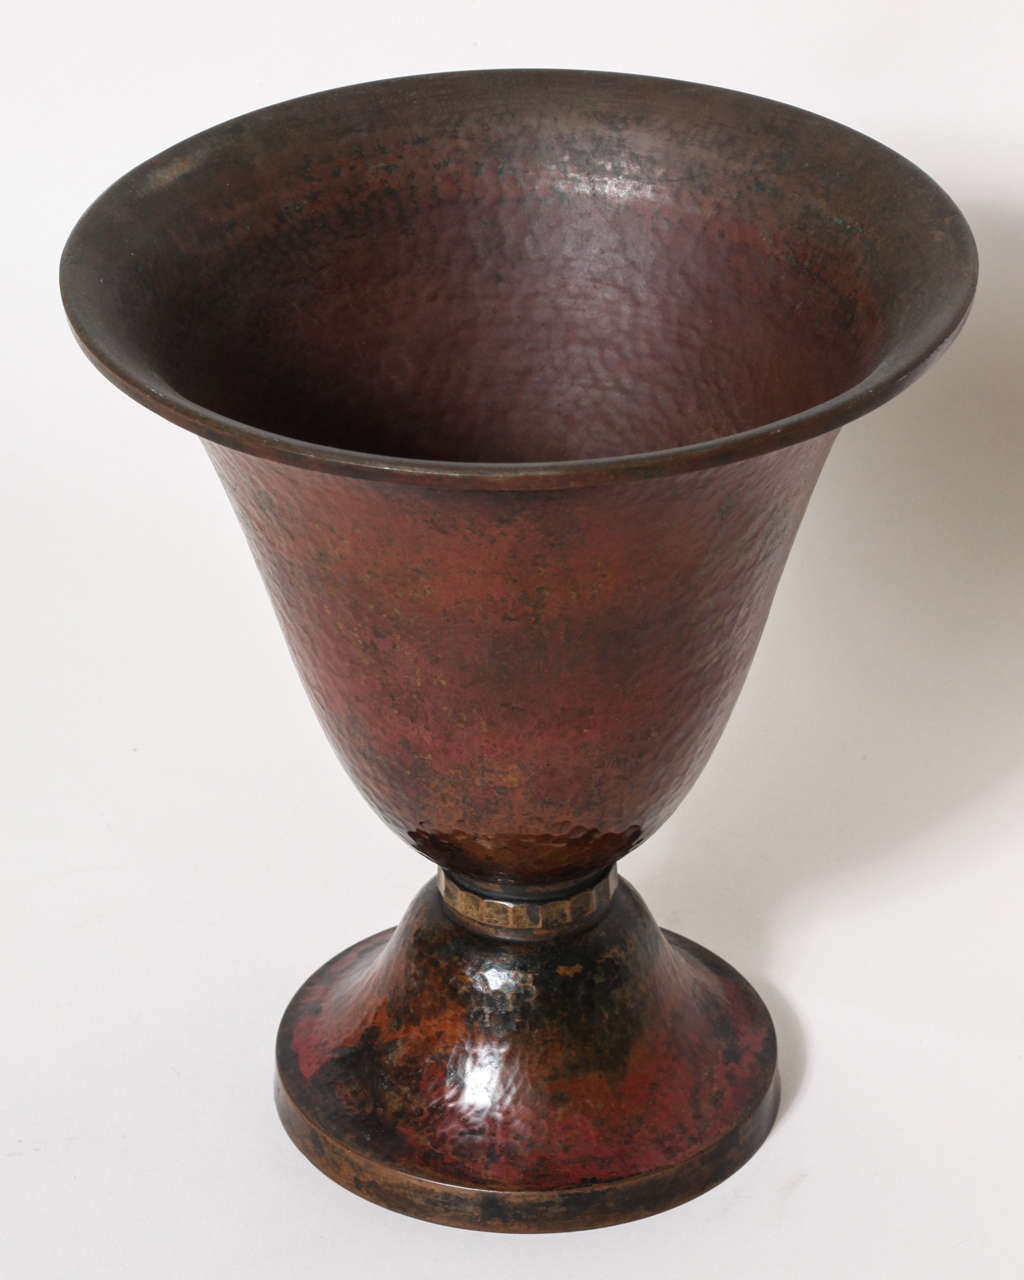 Copper dinanderie vase in tulip form with fluted brass ring separating the vase from the base. This is a very rarified vase with incredible rich red patina and a wonderful form.
Signed: Th Chanut/ Lyon/ Depose/ small flower on brass plate